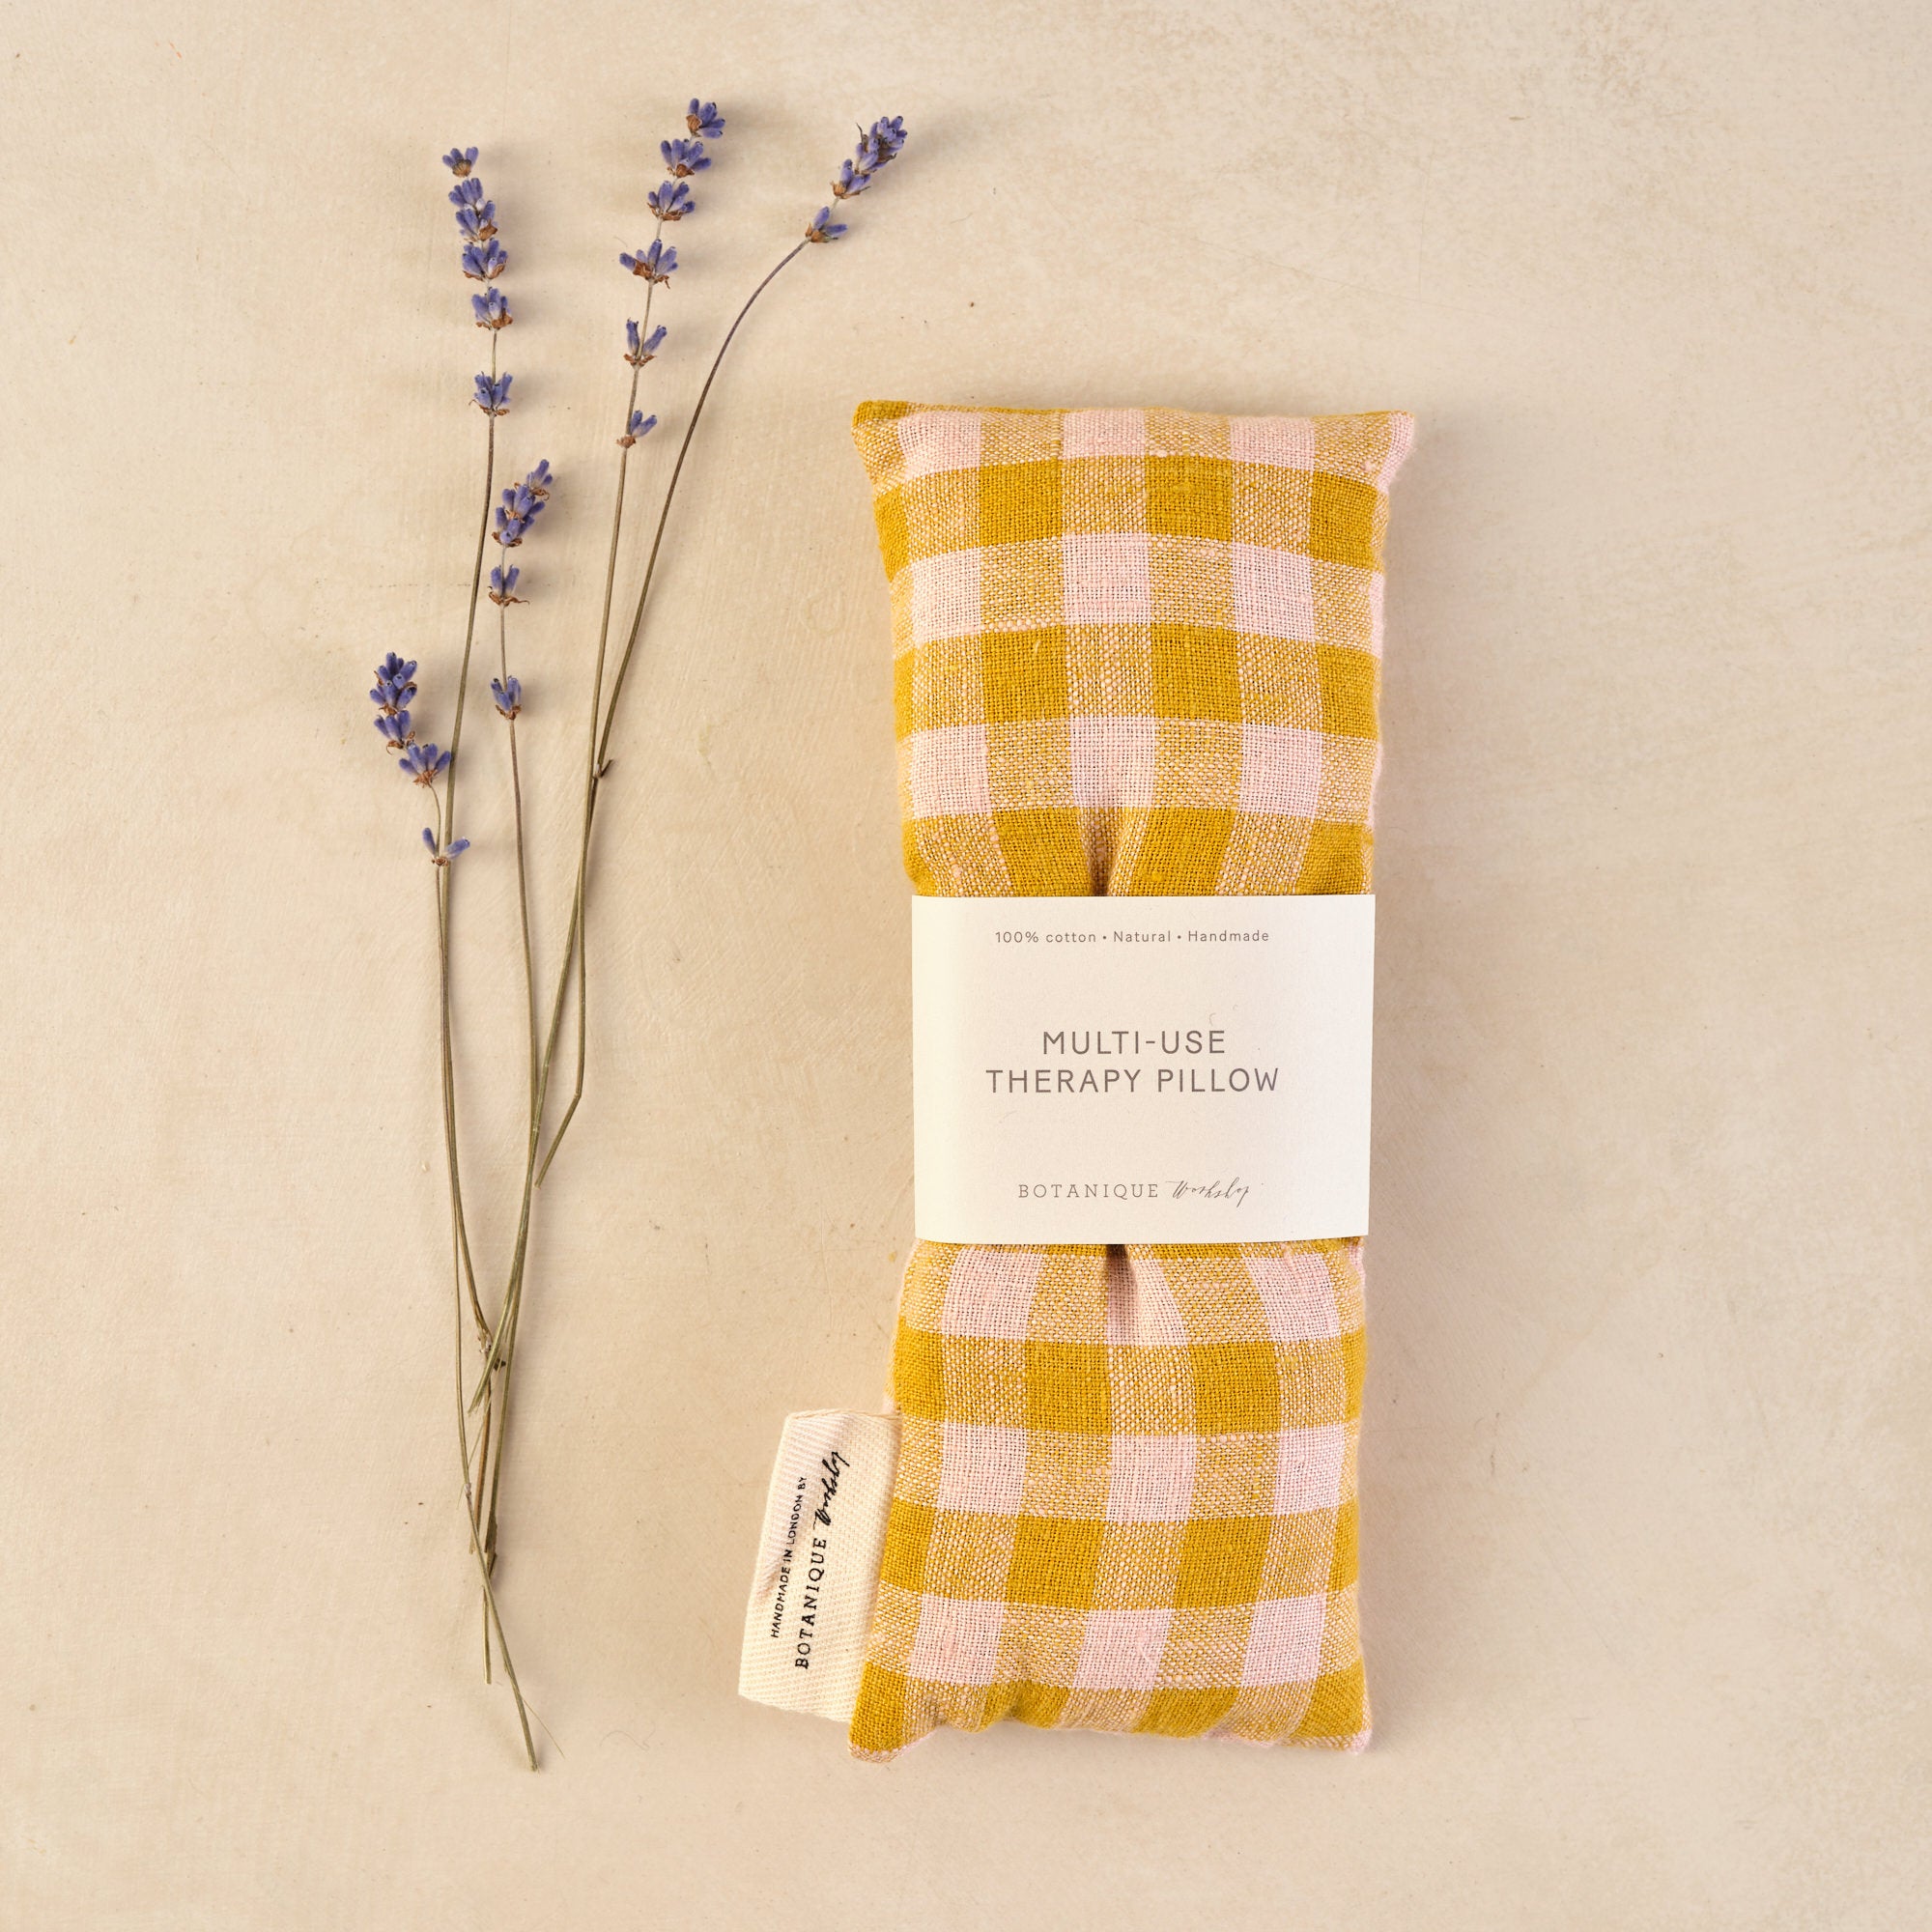 Multi-Use Lavender Therapy Pillow: Small Linen